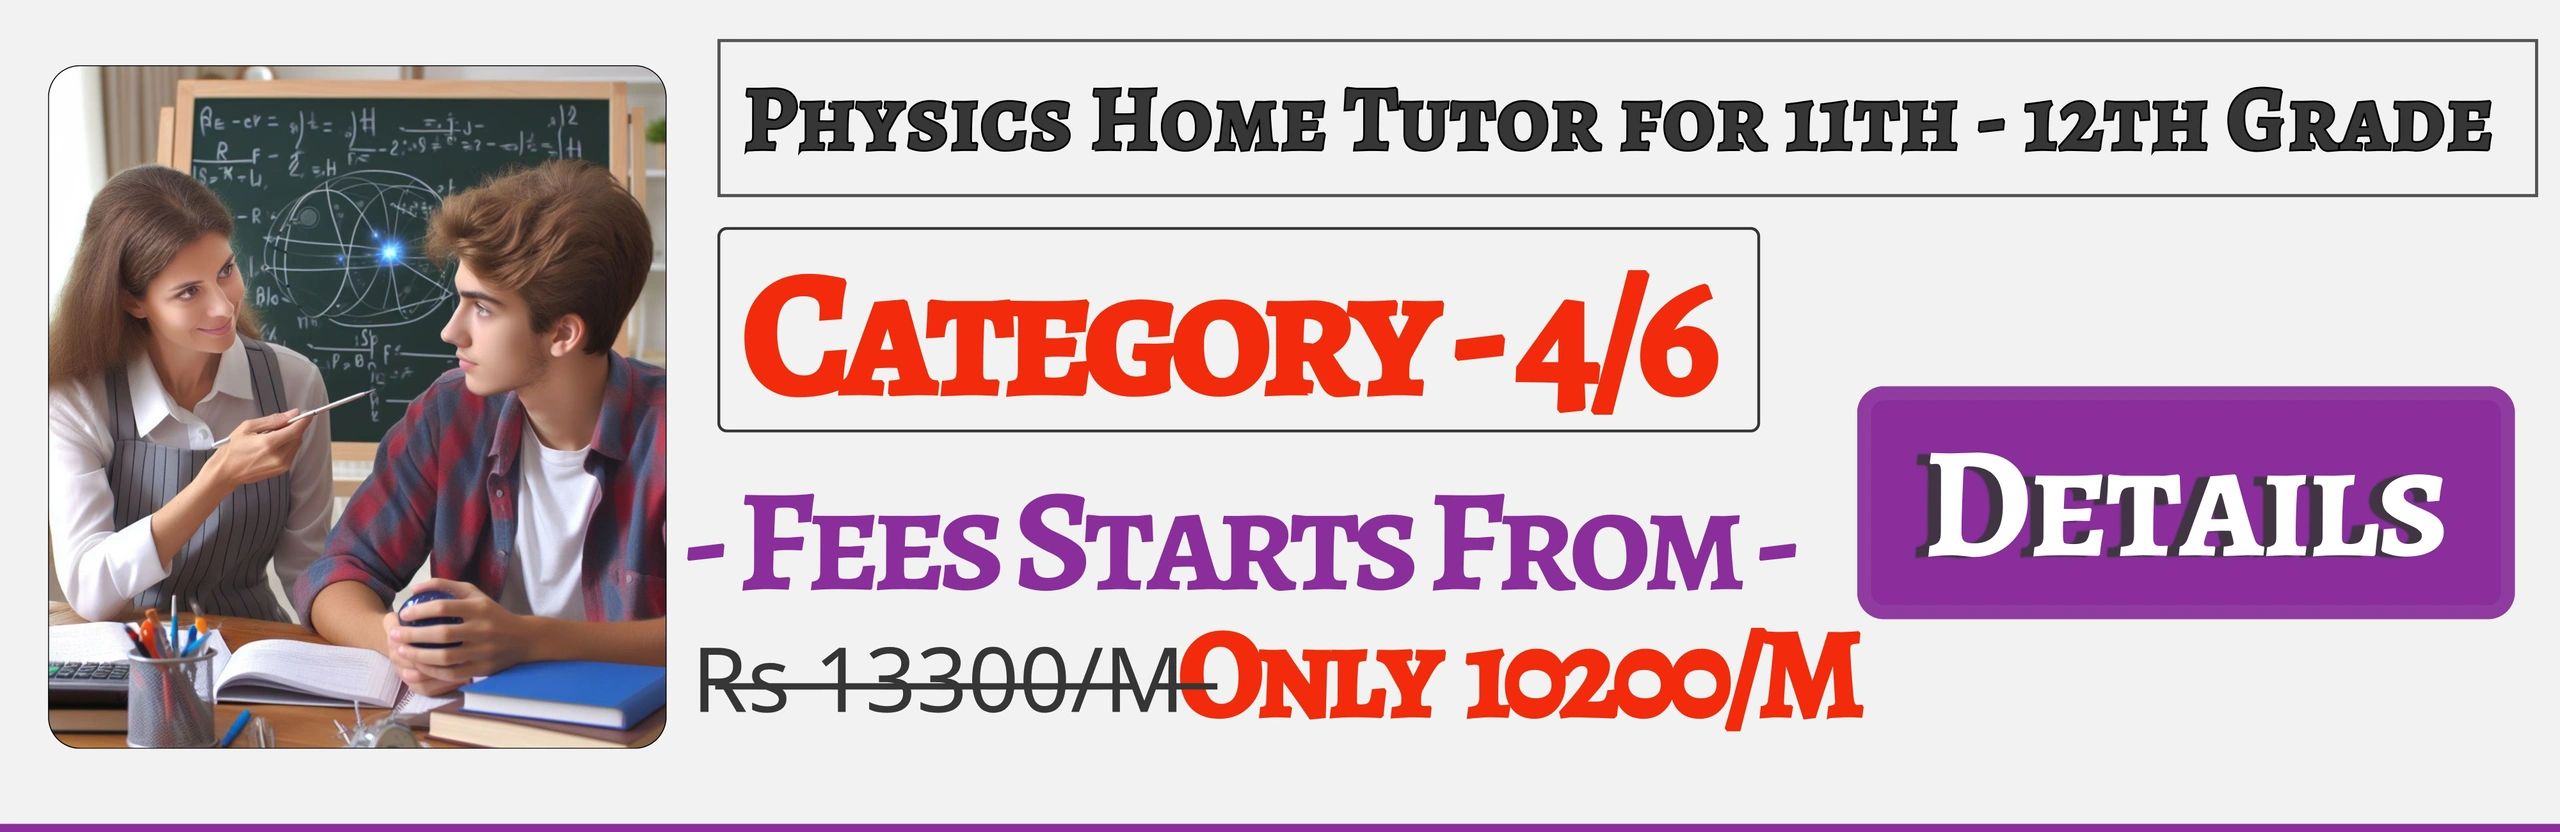 Book Best Nearby Physics Home Tuition Tutors For 11th & 12th In Jaipur , Fees Only 10200/M